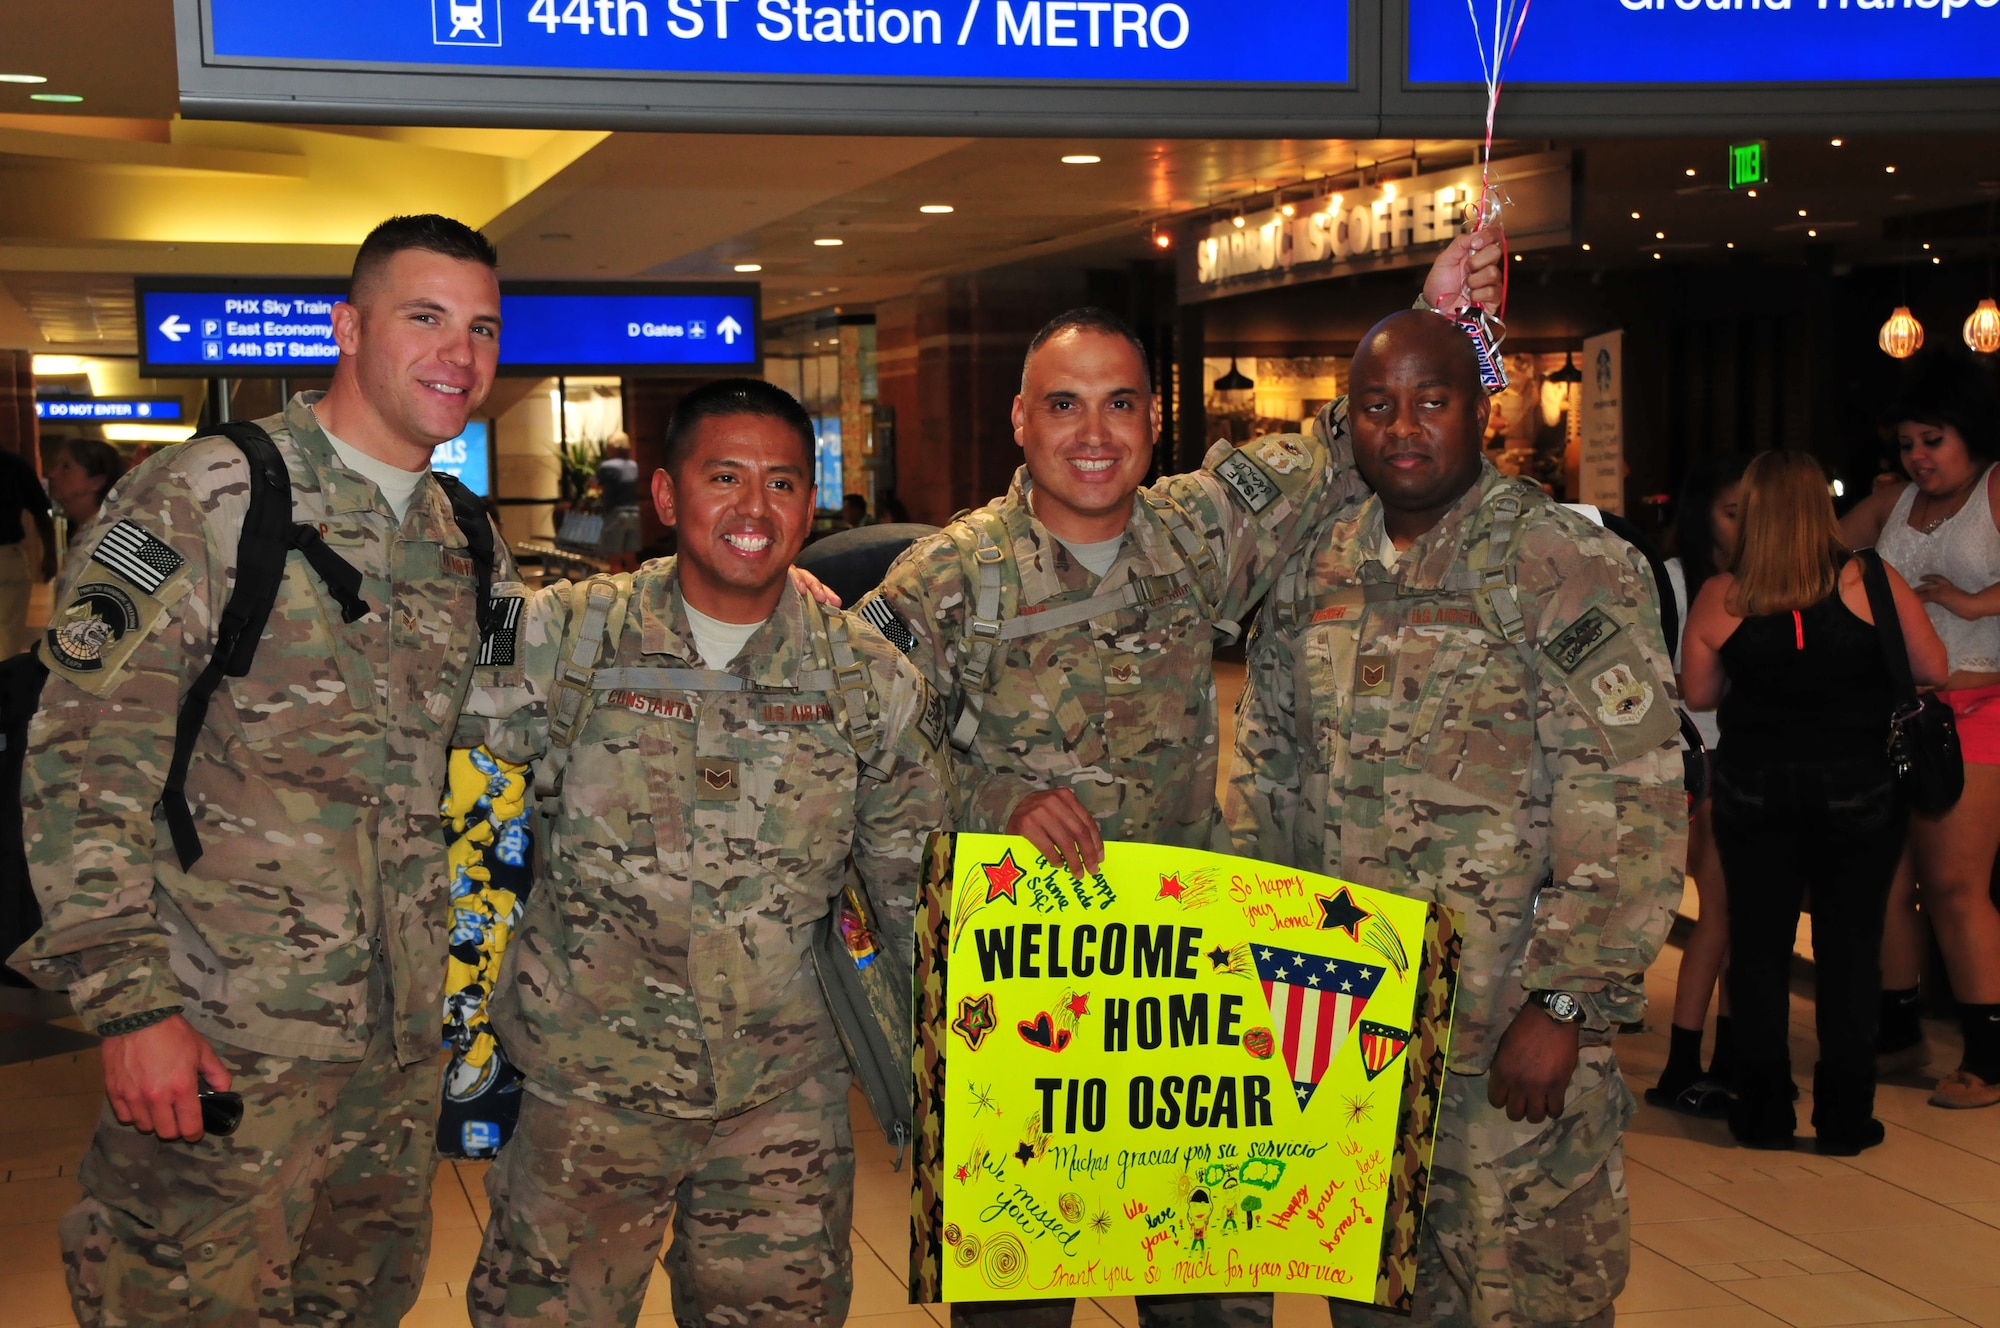 Senior Airman Ryan Culp, Staff Sgt. Rene Constante, Staff Sgt. Oscar Serna and Technical Sgt. Jeon Turner of the 161st Air Refueling Wing Logistics Readiness Squadron are welcomed back to Arizona at the Phoenix Sky Harbor International Airport after their recent deployment, Oct. 3, 2014. Fourteen Airmen from the 161st ARW Aerial Port spent seven months in Afghanistan in support of Operation Enduring Freedom. (U. S. Air National Guard photo by Master Sgt. Kelly M. Deitloff/released)